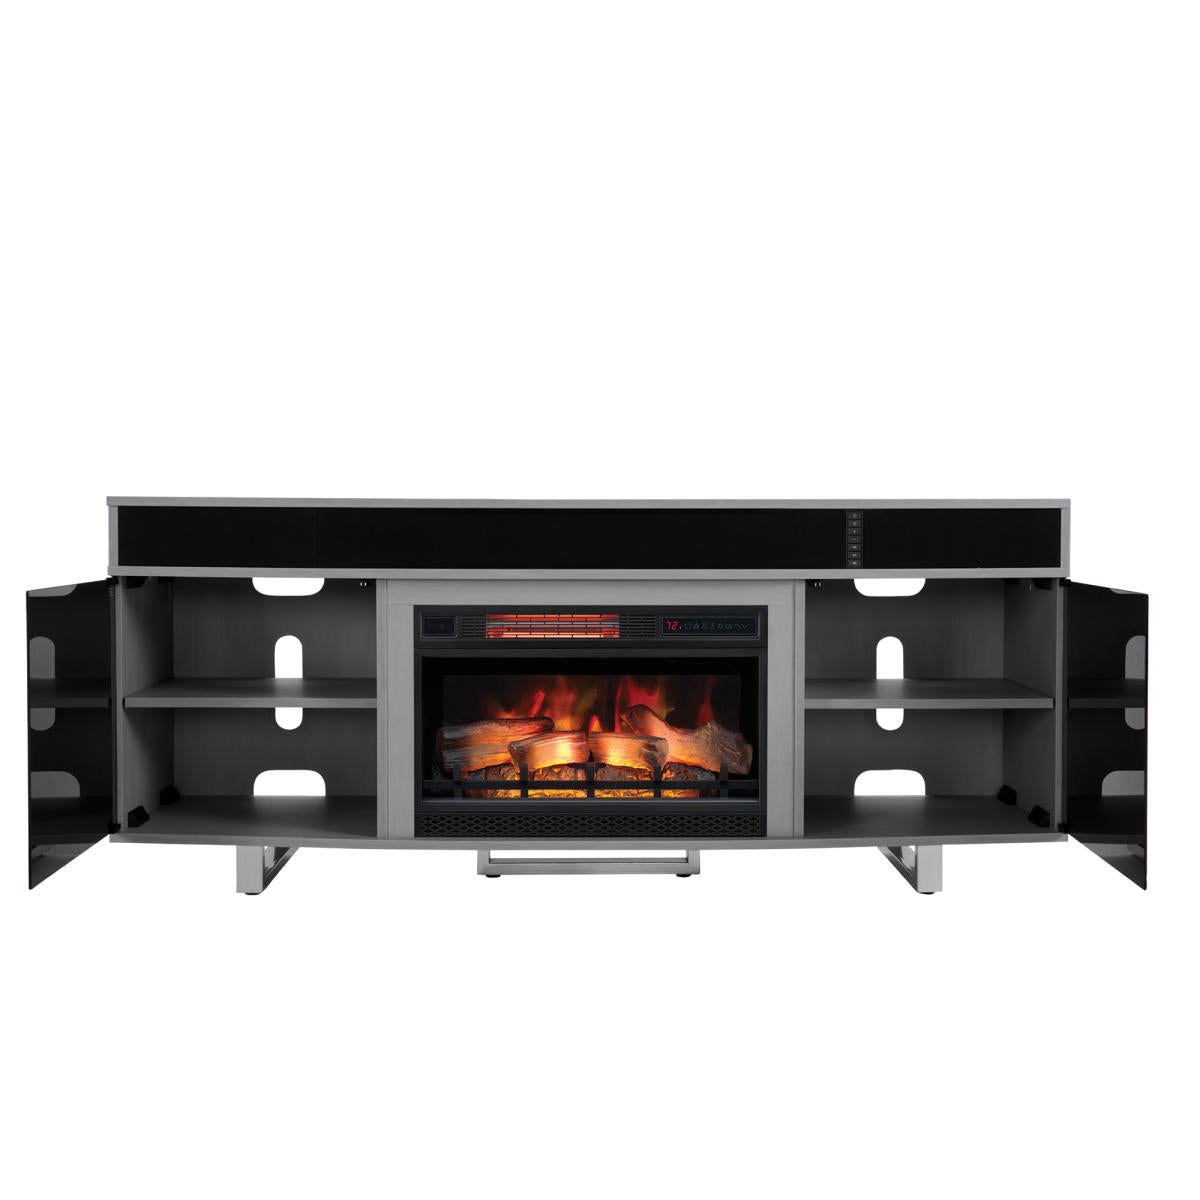 Enterprise TV Stand with Fireplace and Sound Bar - Gray